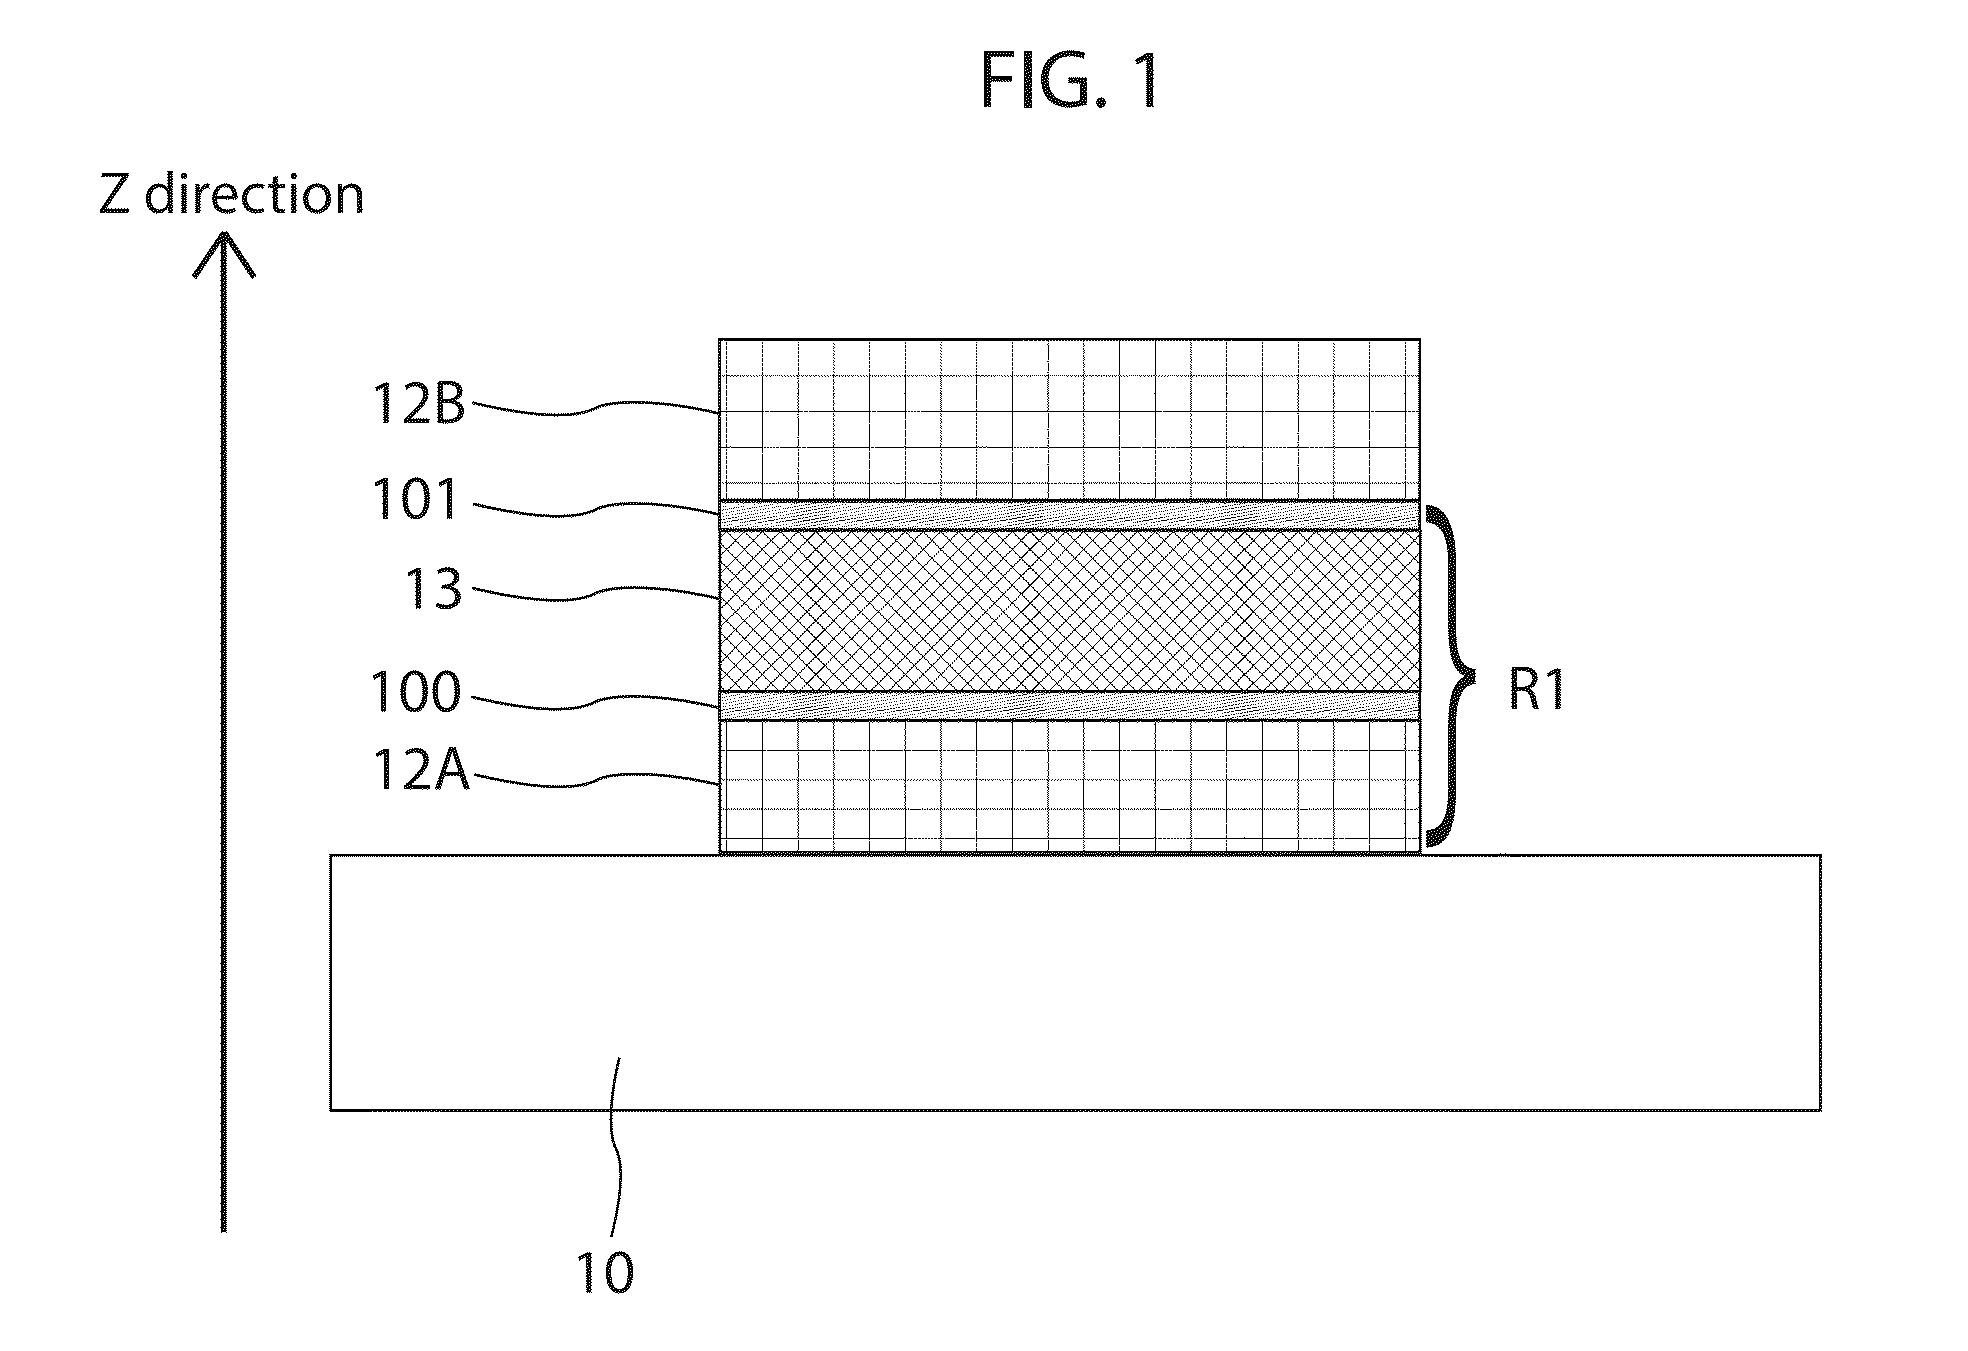 Ferroelectric memory device and fabrication process thereof, and methods for operation thereof